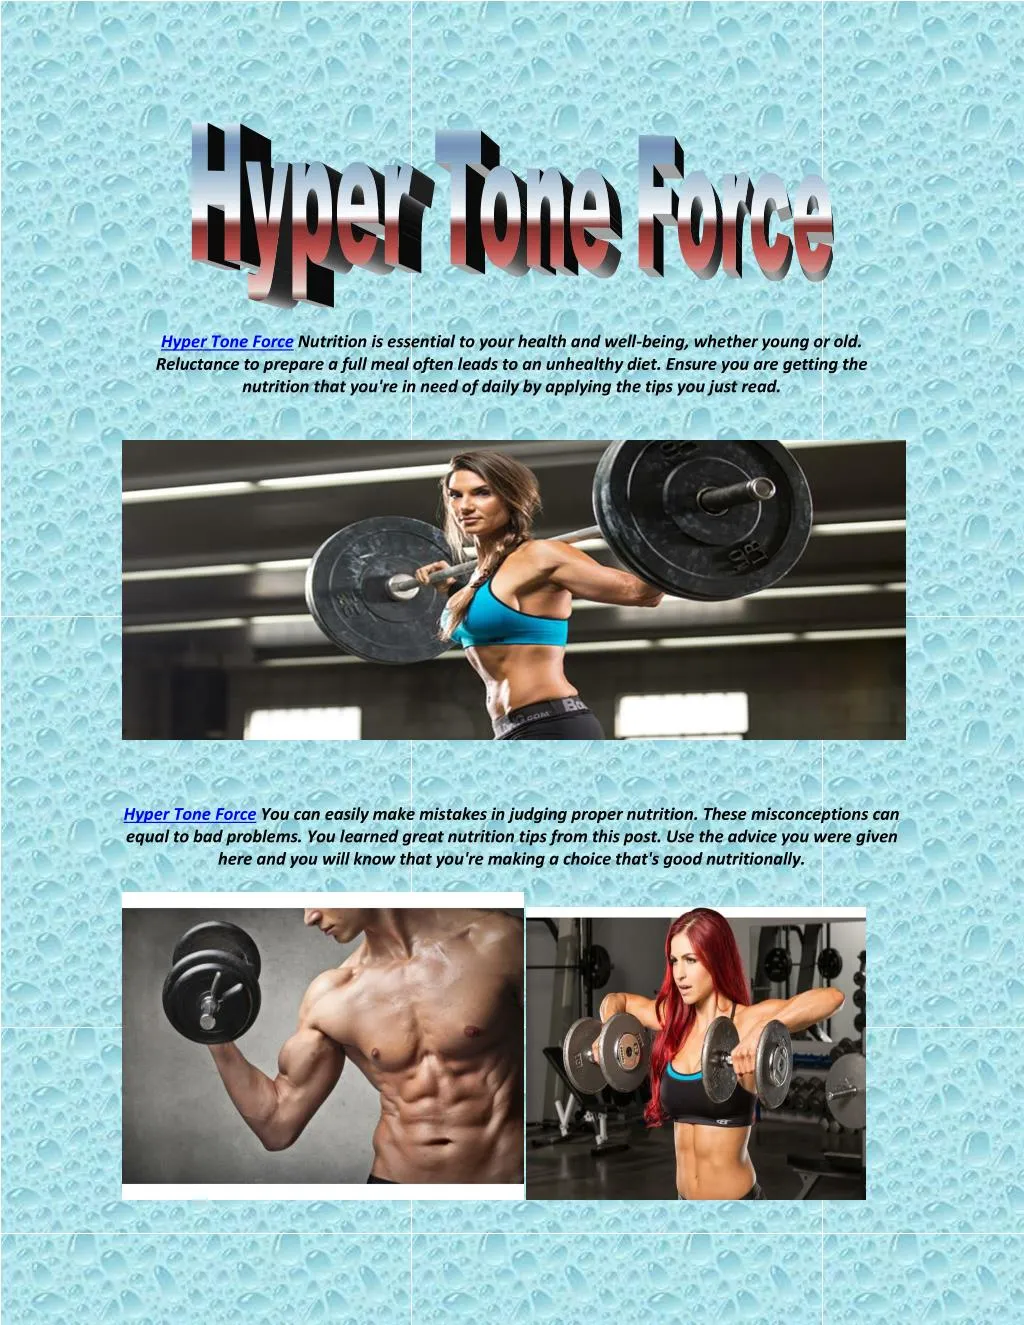 hyper tone force nutrition is essential to your